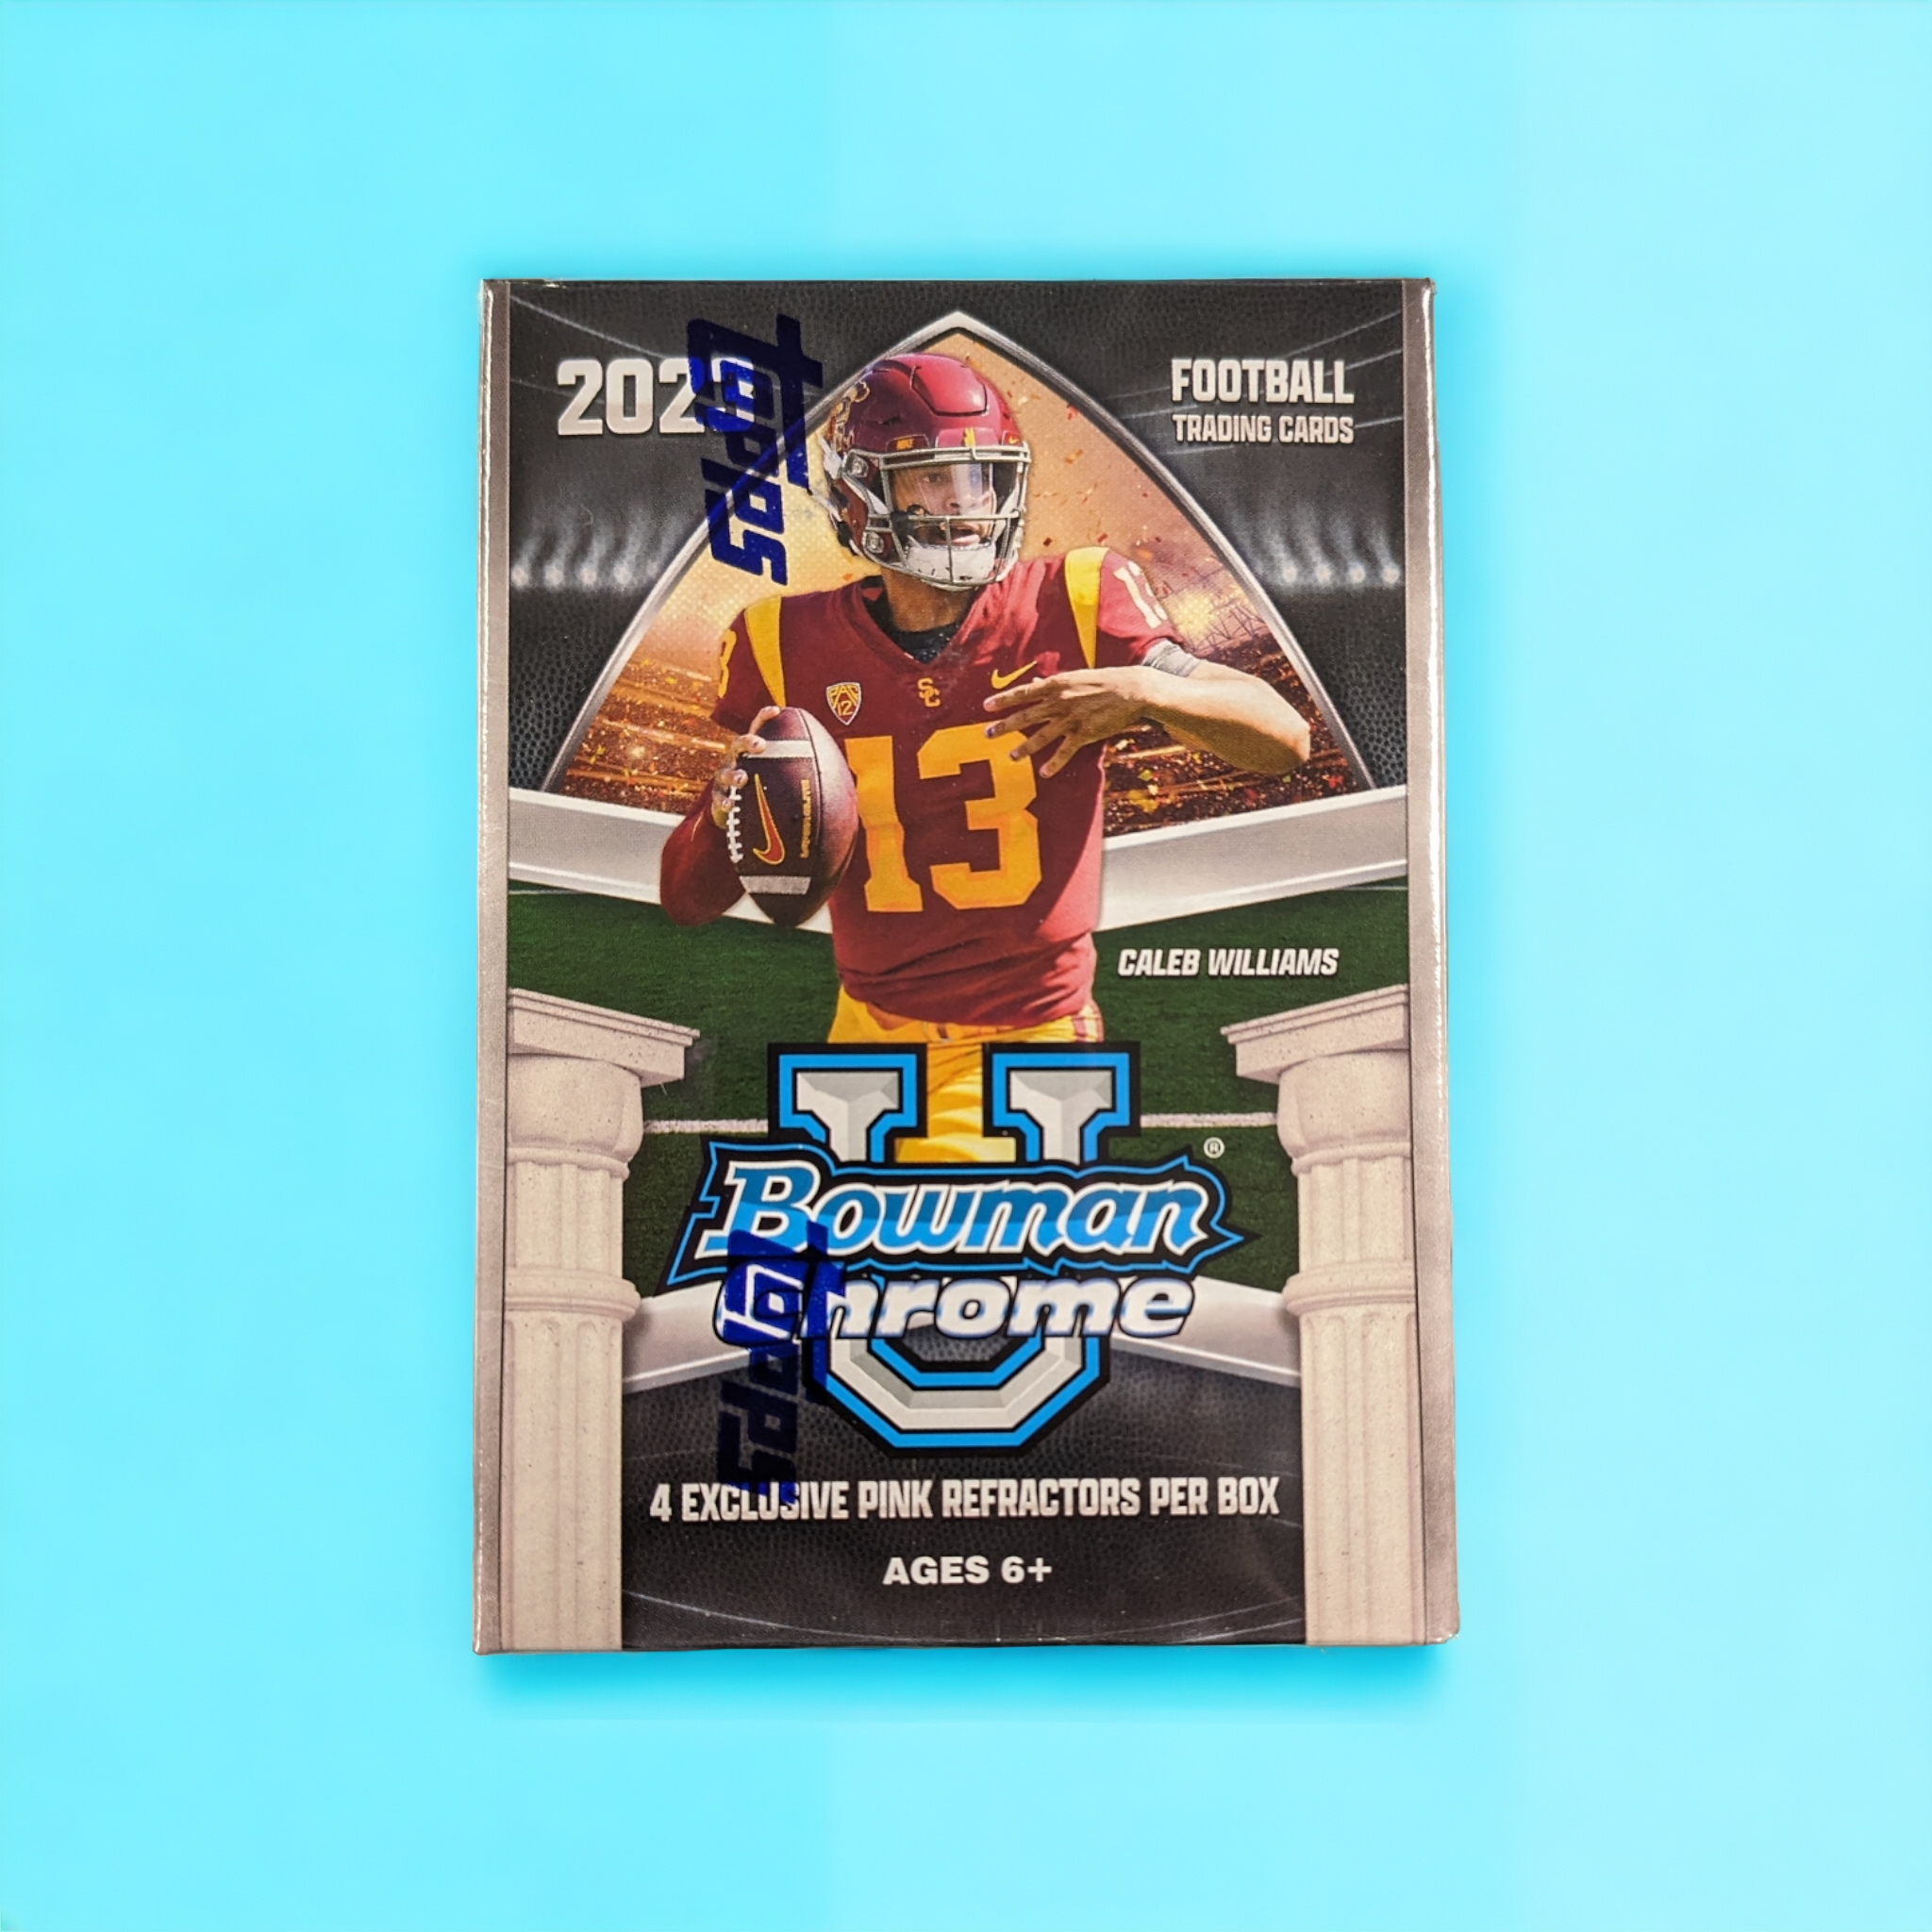 2023 Bowman University Chrome Football YOU PICK CARDS UPDATED